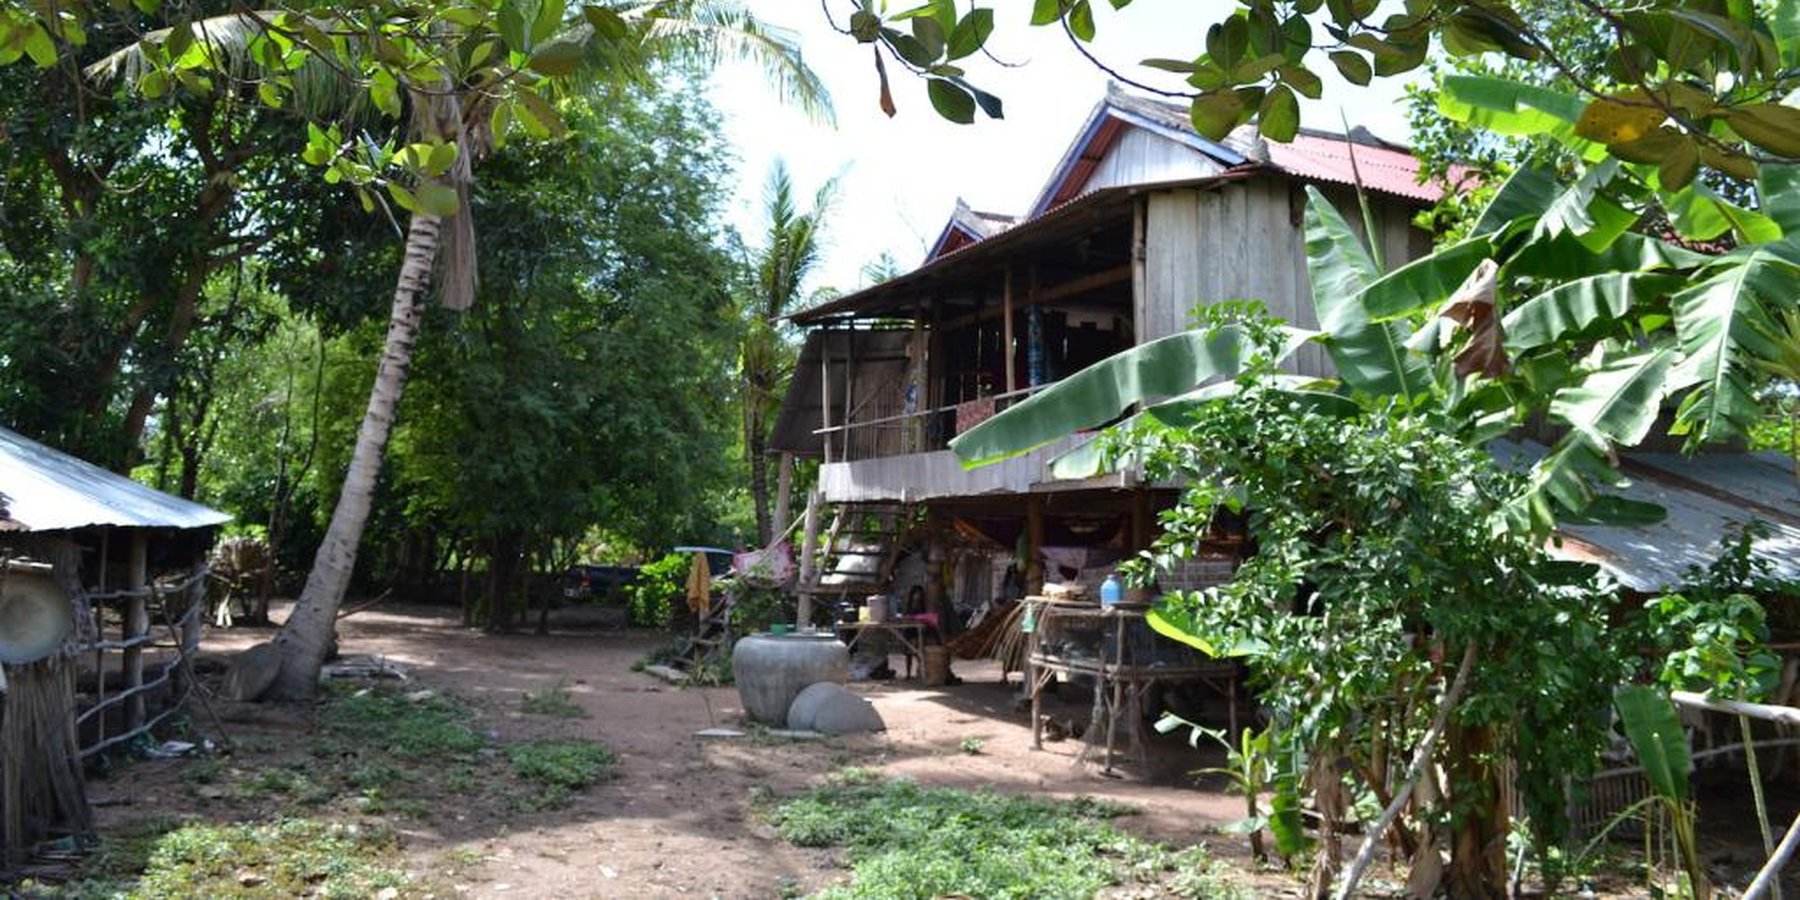 Typical house in rural Cambodia